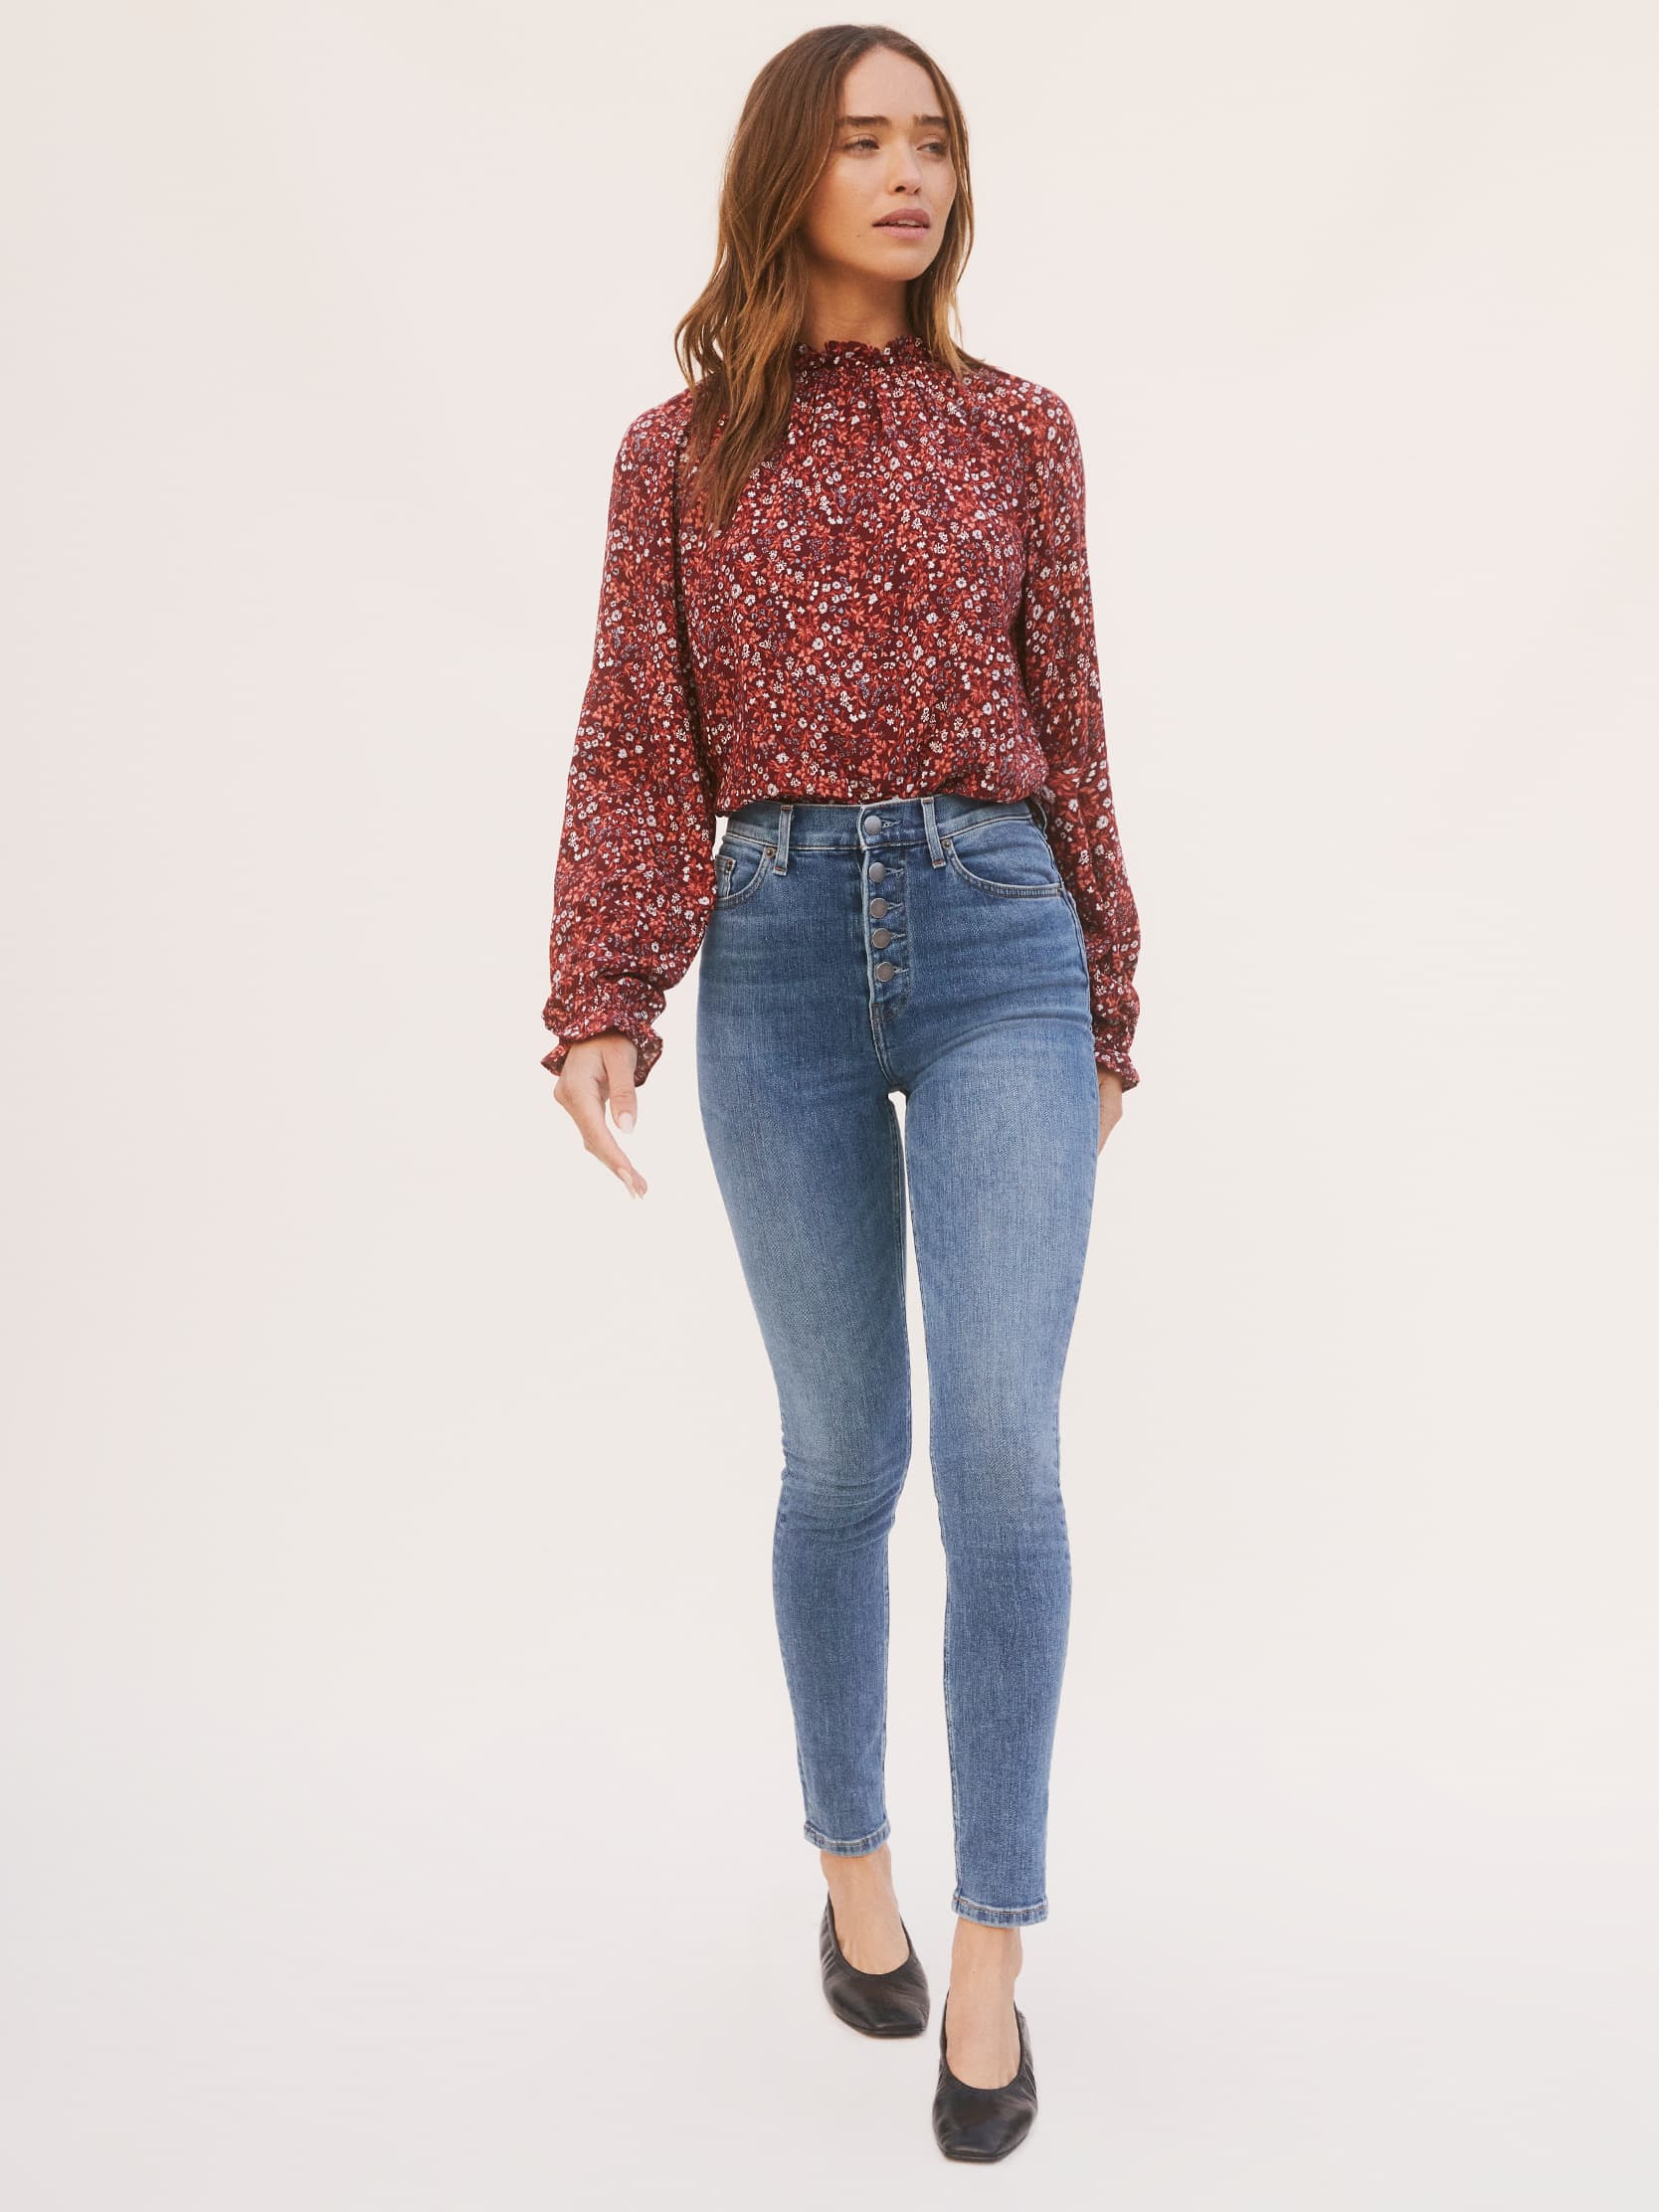 Patent salat deadline Harper Button Fly High Rise Skinny Jeans | Reformation